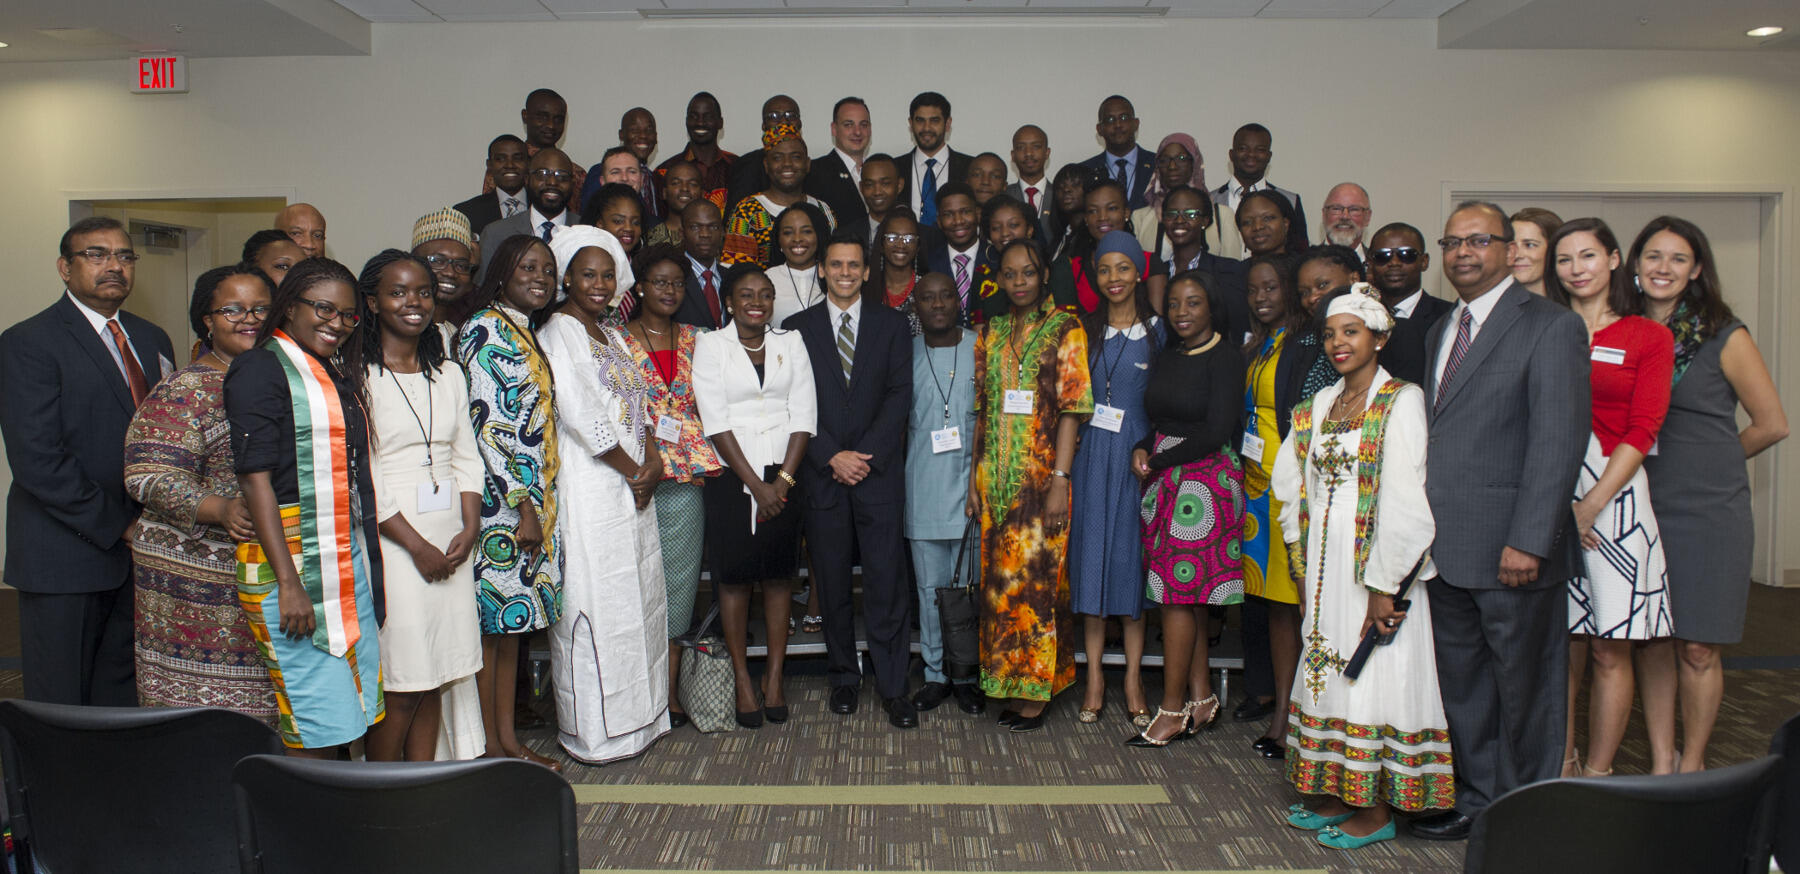 Fellows in VCU's Mandela Washington Fellowship for Young African Leaders.